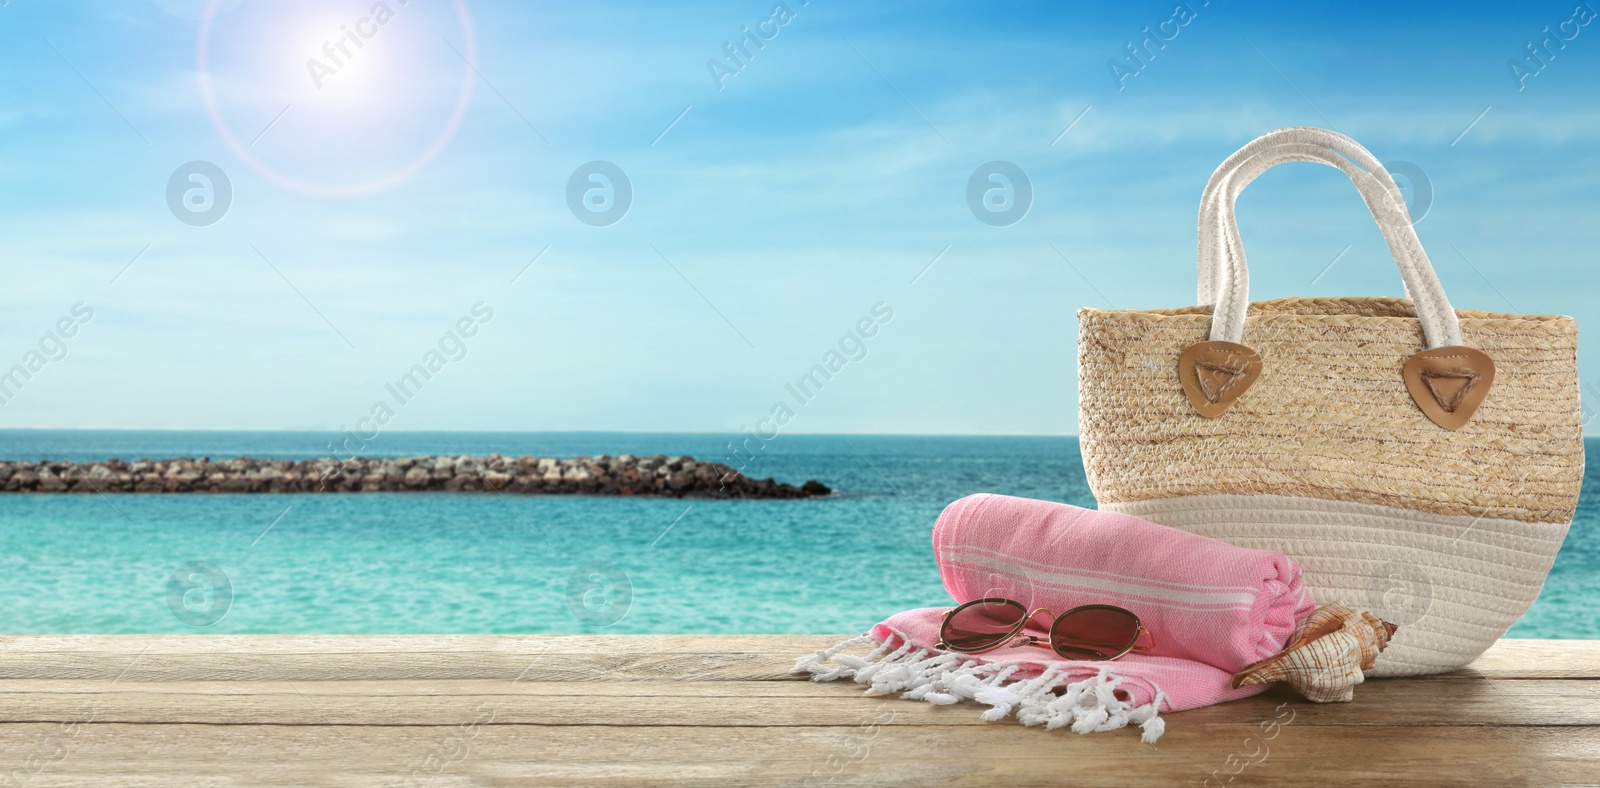 Image of Beach accessories on wooden surface near ocean, space for text. Banner design 